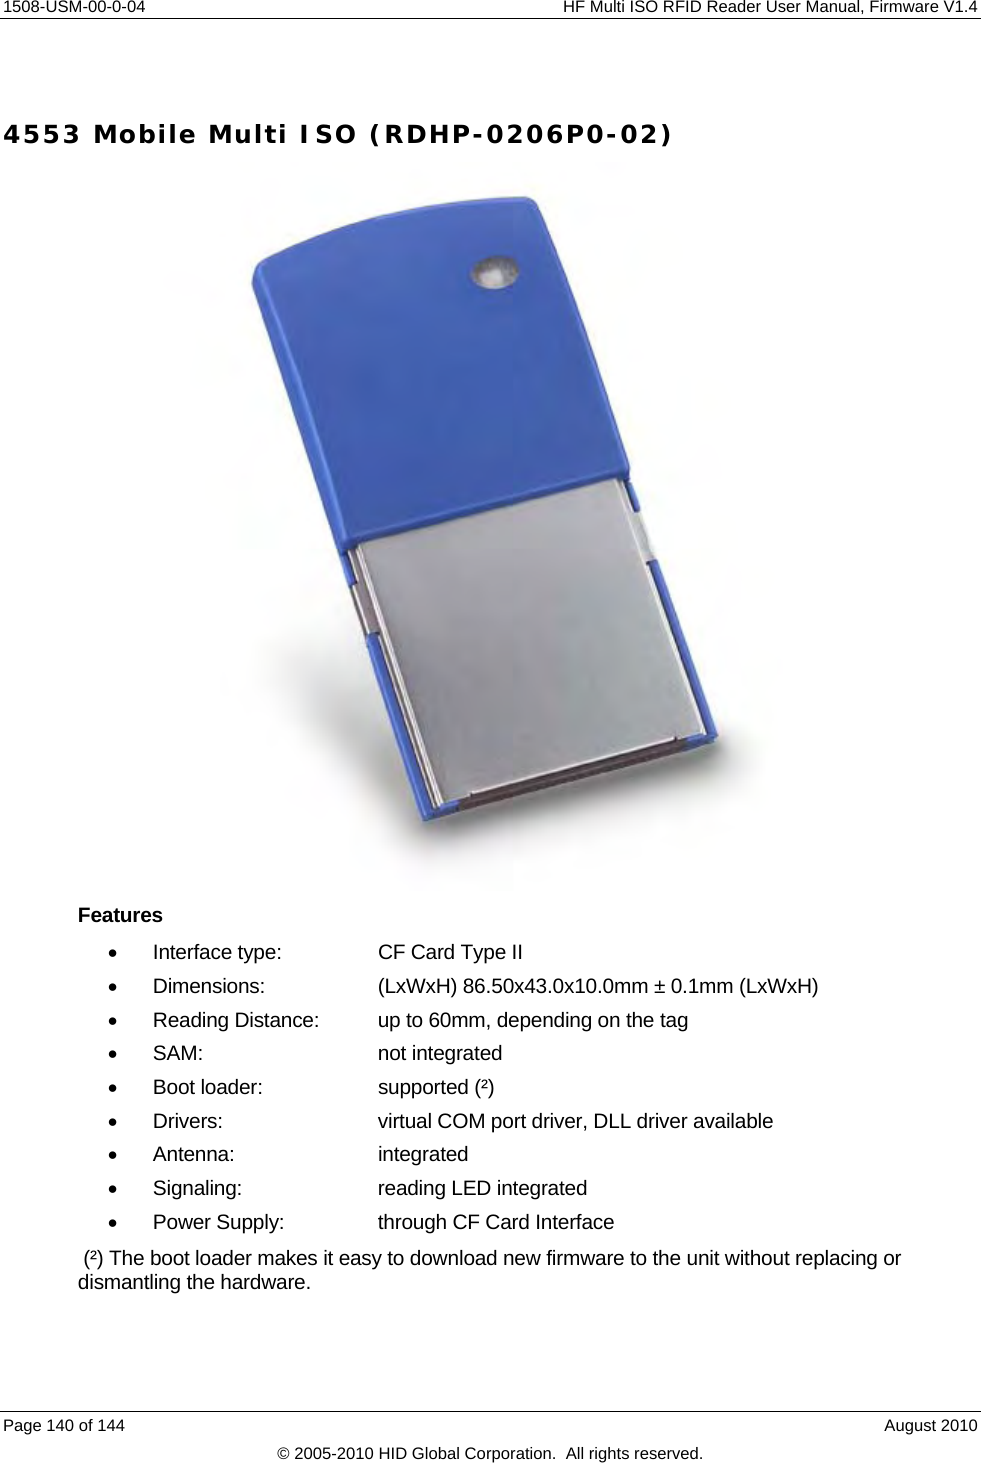     1508-USM-00-0-04    HF Multi ISO RFID Reader User Manual, Firmware V1.4  4553 Mobile Multi ISO (RDHP-0206P0-02)  Features   Interface type:    CF Card Type II   Dimensions:    (LxWxH) 86.50x43.0x10.0mm ± 0.1mm (LxWxH)   Reading Distance:  up to 60mm, depending on the tag  SAM:   not integrated   Boot loader:    supported (²)   Drivers:     virtual COM port driver, DLL driver available  Antenna:    integrated   Signaling:    reading LED integrated   Power Supply:    through CF Card Interface  (²) The boot loader makes it easy to download new firmware to the unit without replacing or dismantling the hardware. Page 140 of 144    August 2010 © 2005-2010 HID Global Corporation.  All rights reserved. 